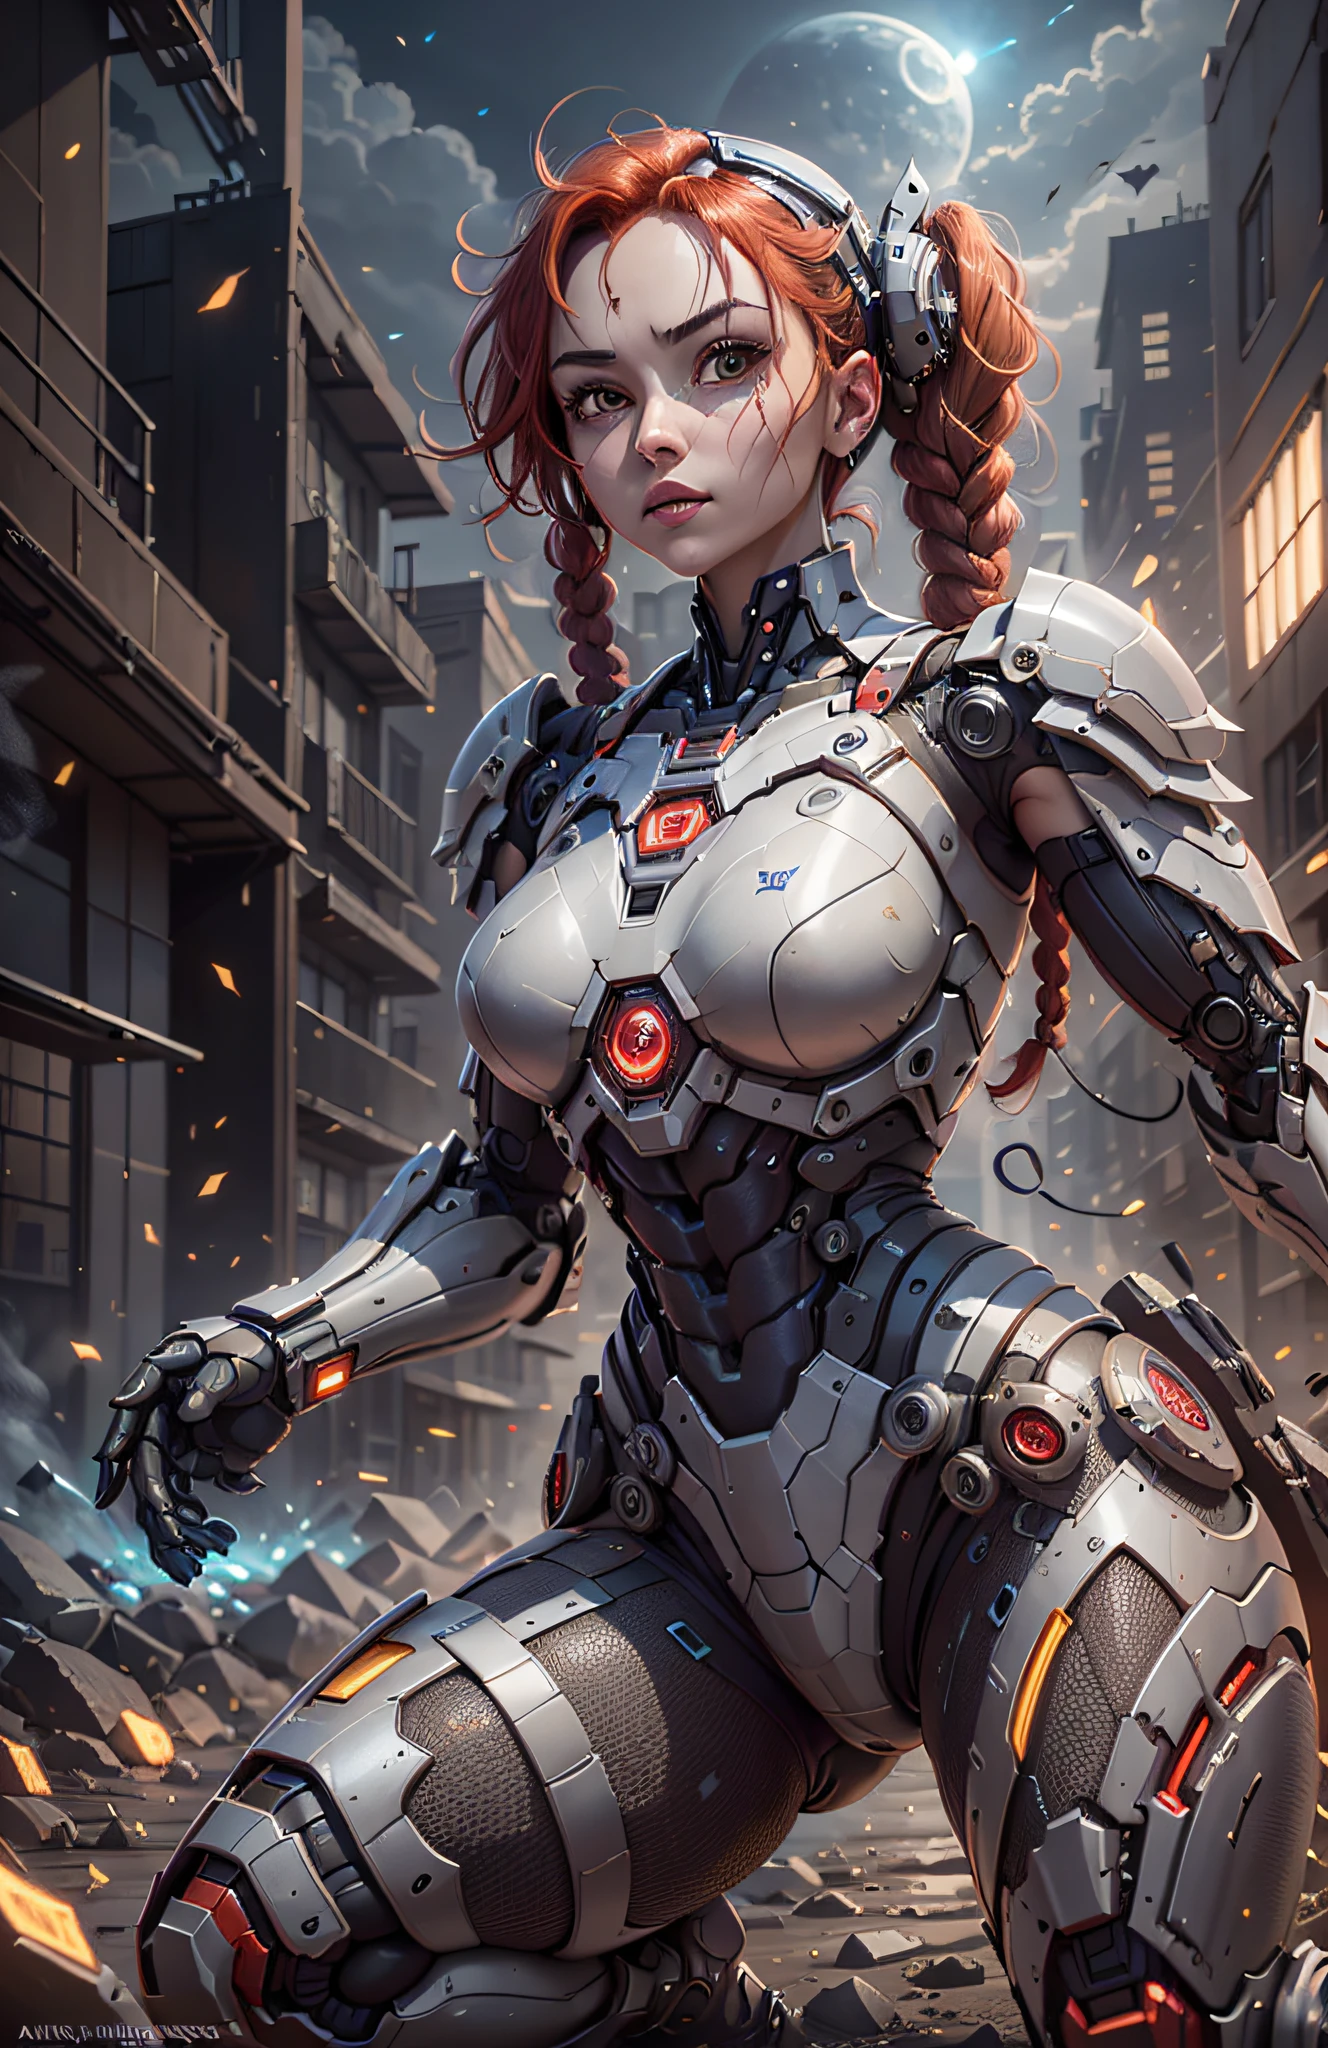 (Best Quality)), ((Masterpiece)), (Very Detailed: 1.3), 3D, Beautiful cyberpunk woman, Iron Man cosplay, sci-fi technology, HDR (High Dynamic Range), ray tracing, nvidia RTX, super resolution, unreal 5, subsurface scattering, PBR texture, post-processing, anisotropic filtering, depth of field, maximum sharpness and sharpness, multi-layer texture, specular and albedo mapping, surface shading, accurate simulation of light-material interactions,  perfect proportions, octane rendering, duotone lighting, low ISO, white balance, rule of thirds, wide aperture, 8K RAW, high efficiency subpixels, subpixel convolution, light particles, light scattering, Tyndall effect, very sexy bikini, full body, battle pose, red hair with braids, bats in the sky notuno, full moon,